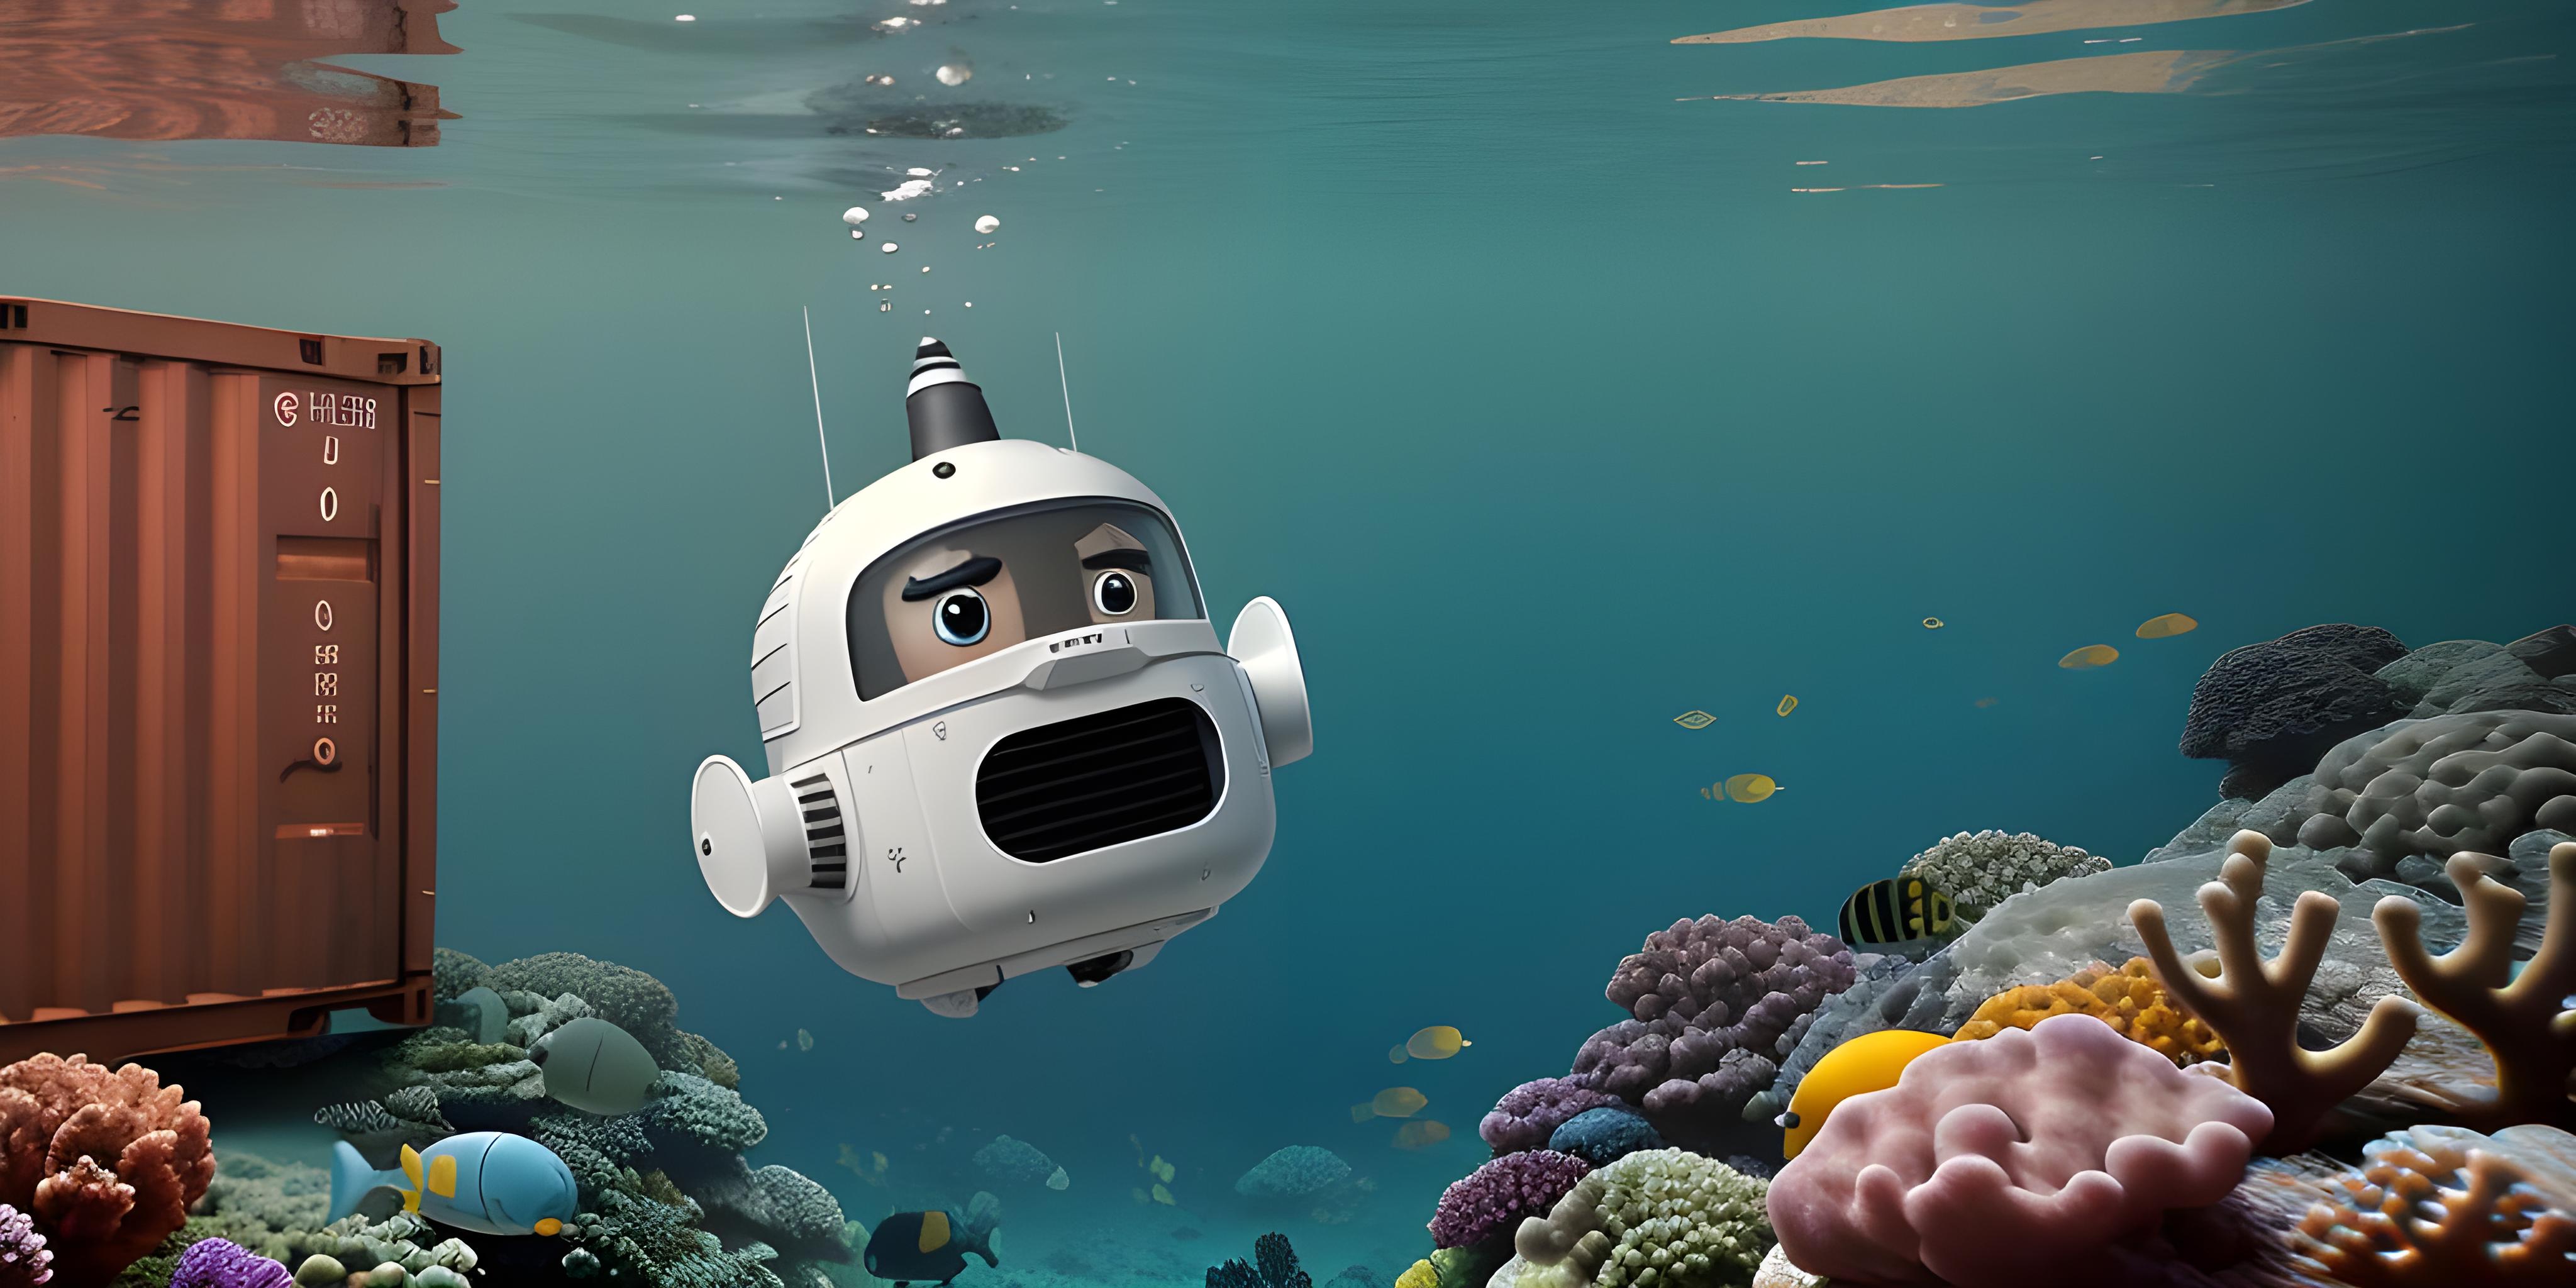 A cartoonish submarine with eyes next to a shipping container underwater